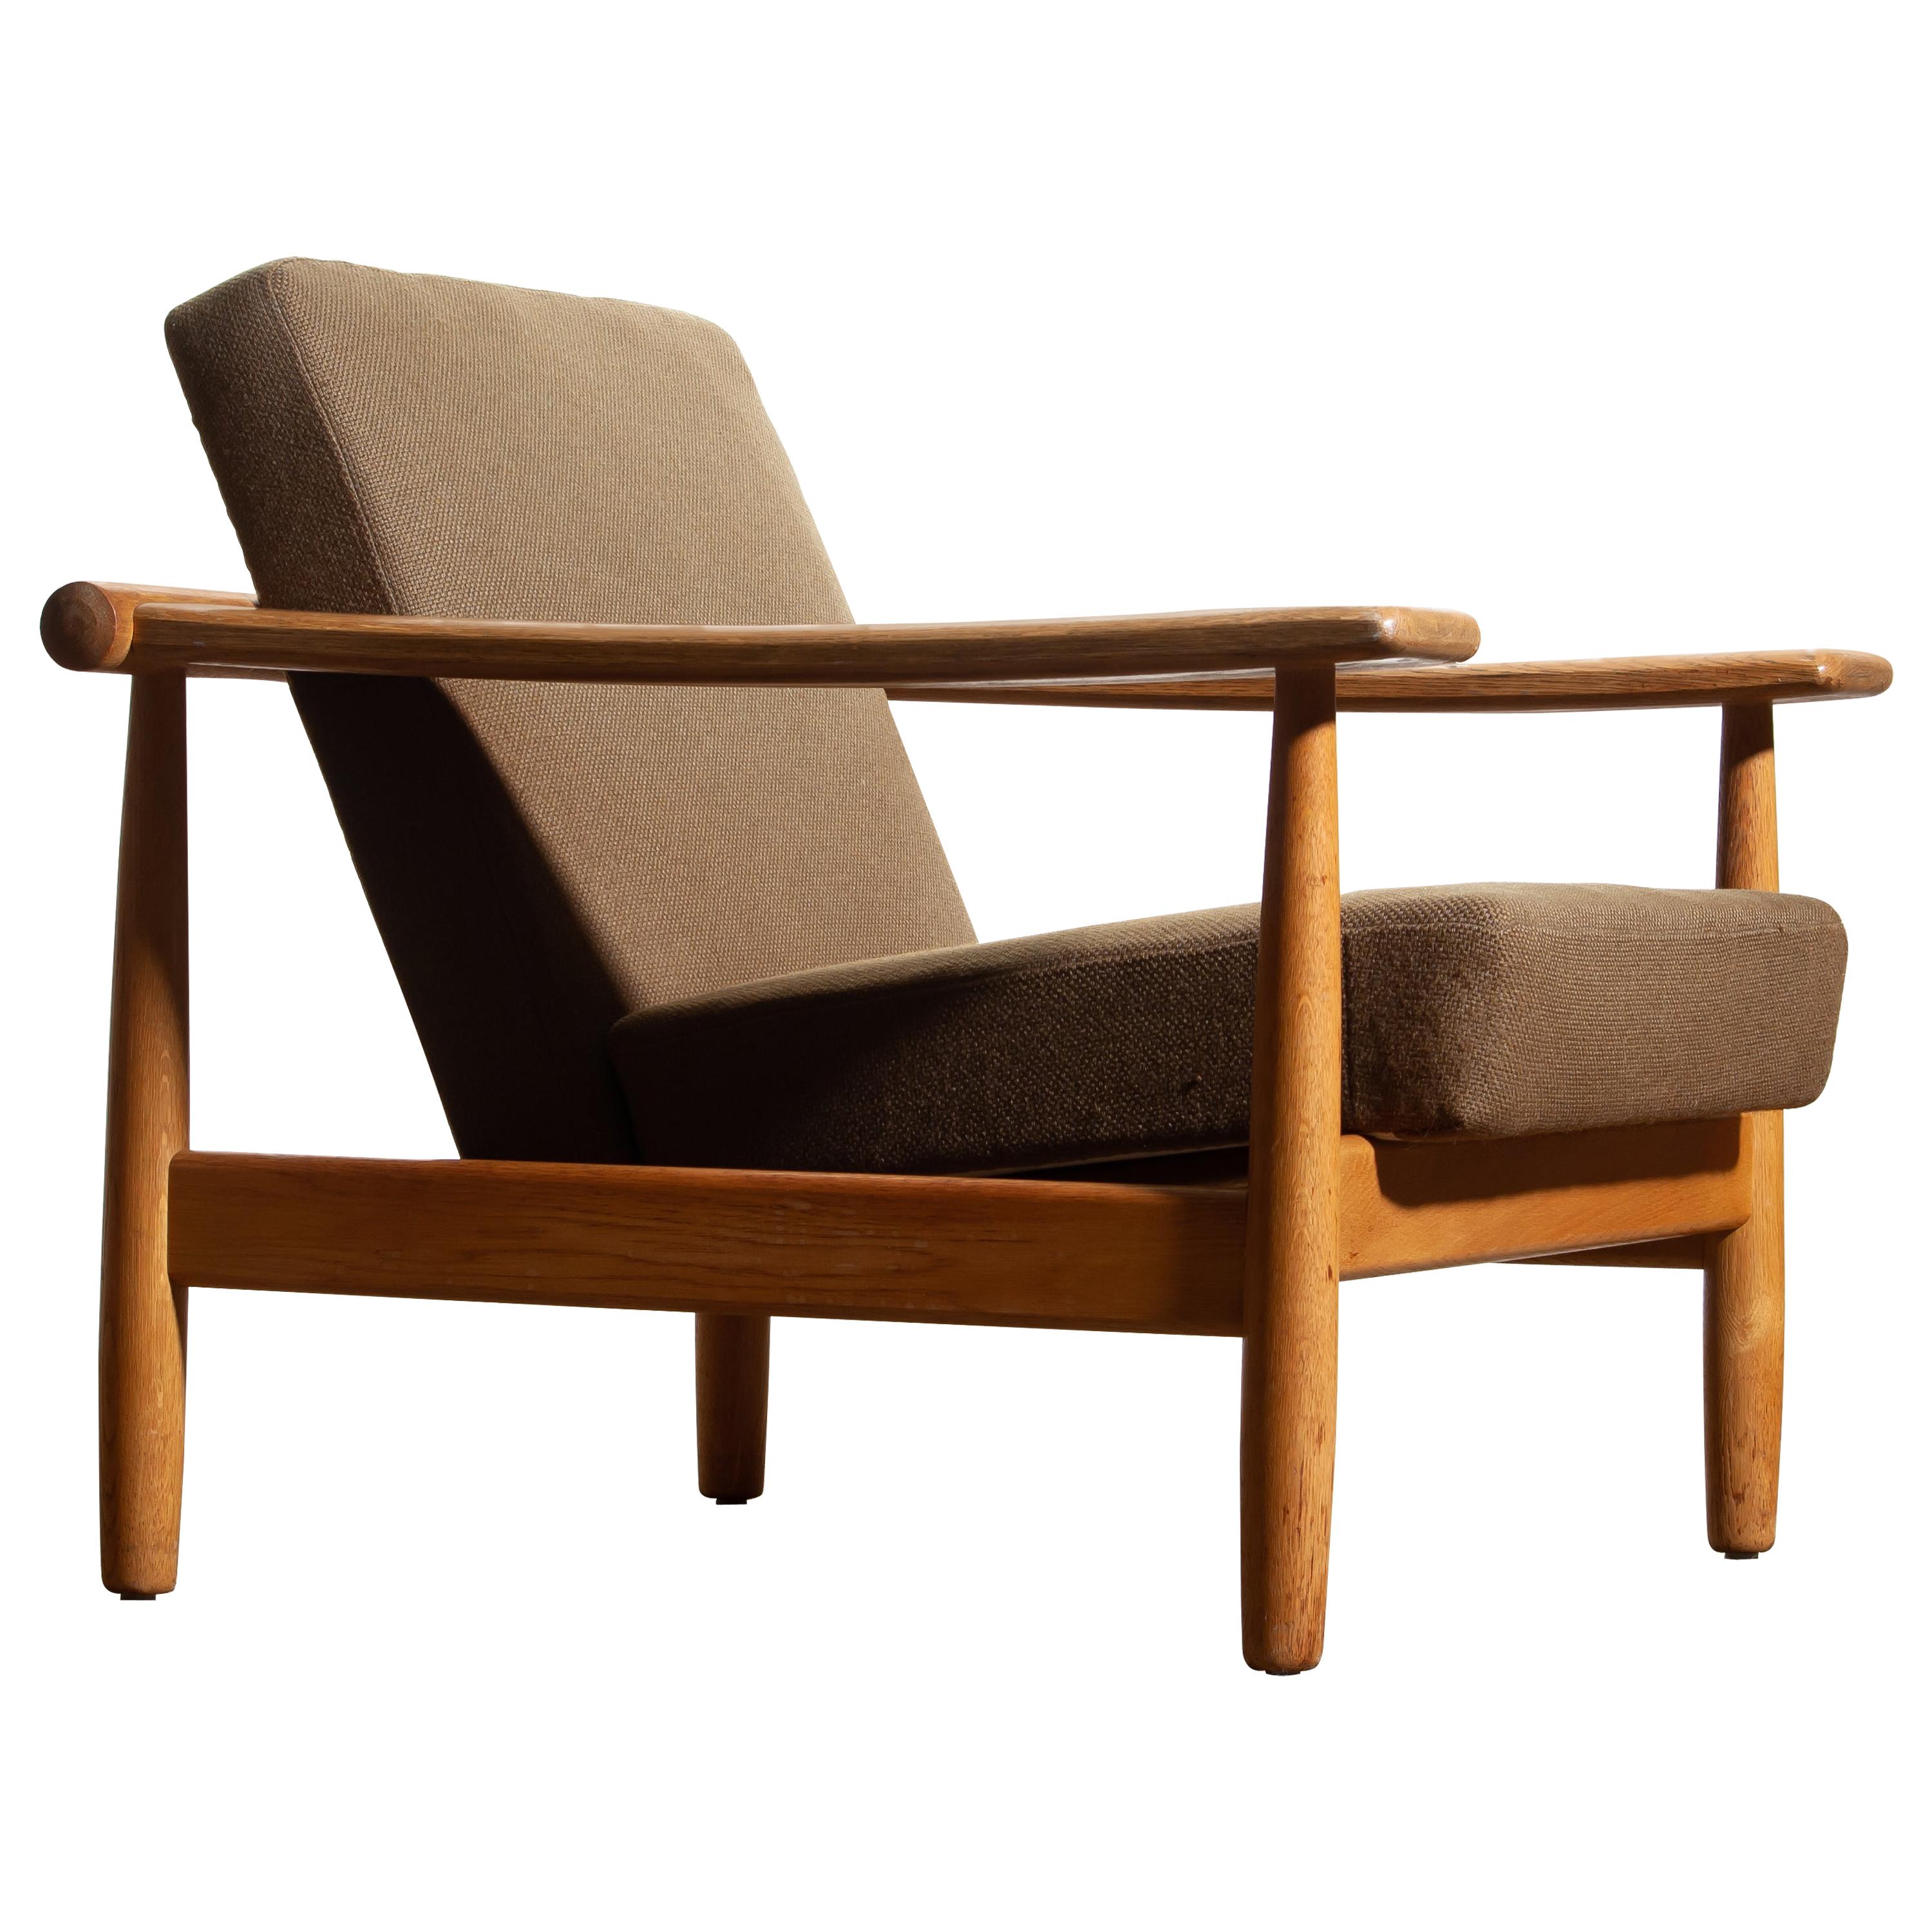 Beautiful oak lounge chair from the 1960s made in Denmark.
The oak frame is in good condition.
The fabric is in fair condition like the pictures shows.



   